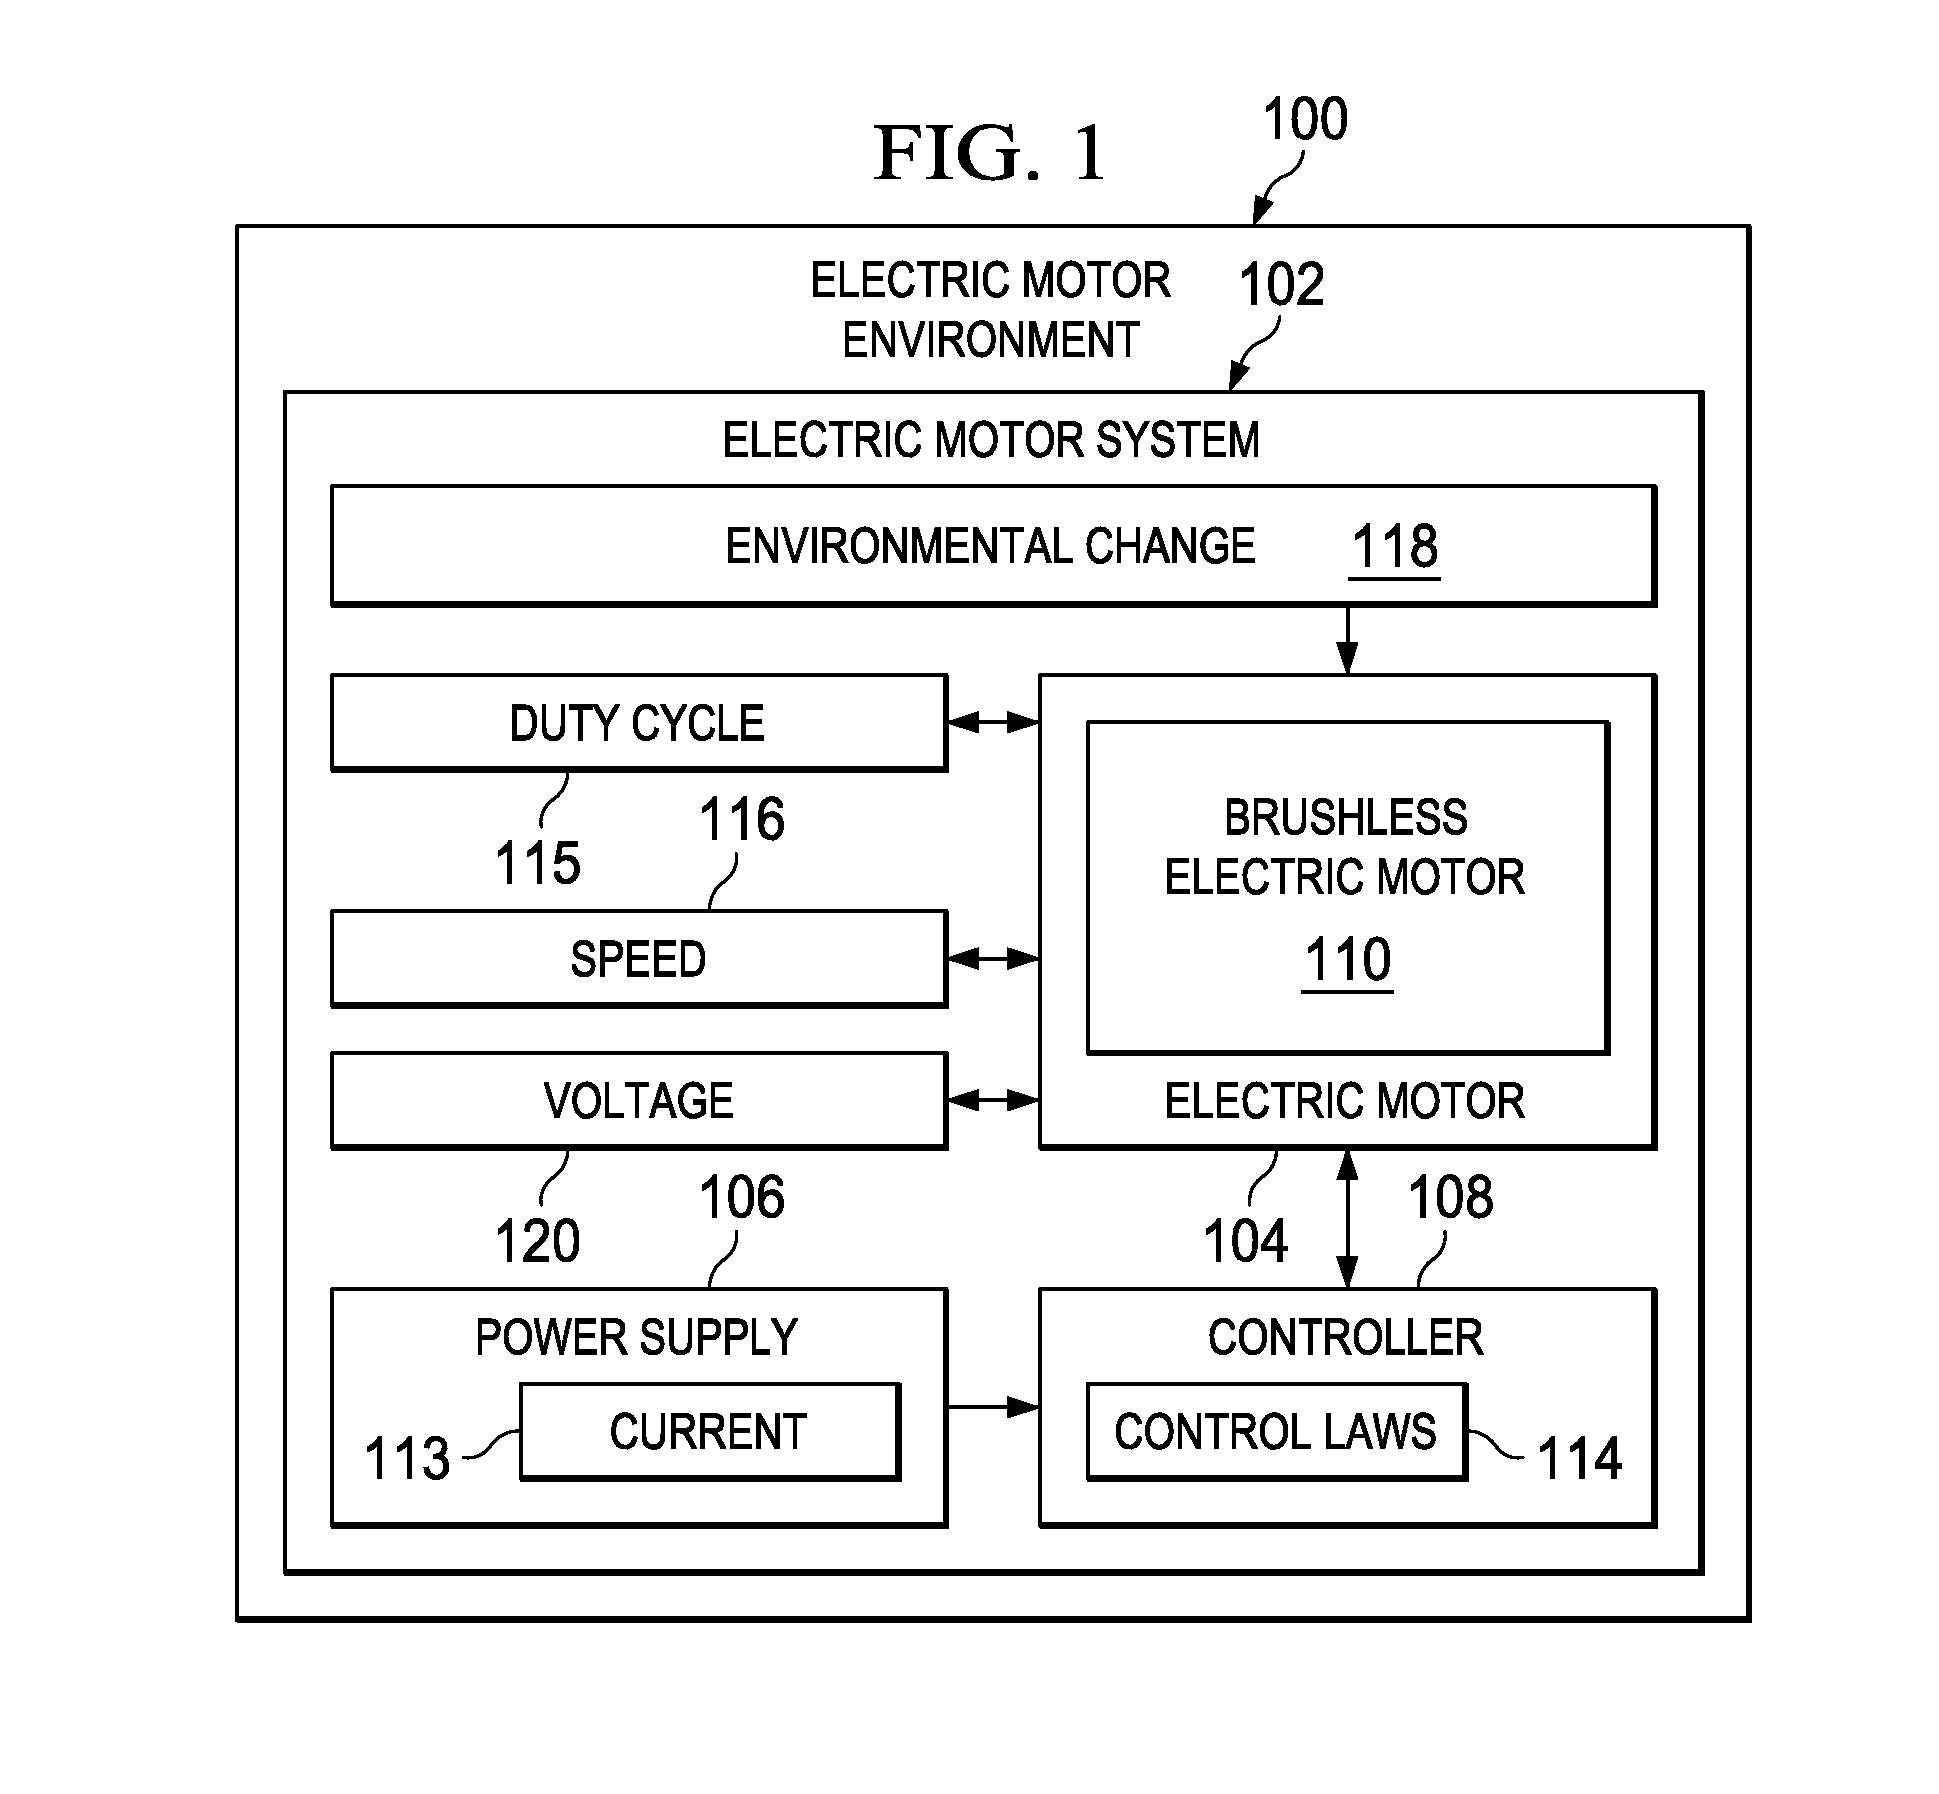 Active voltage controller for an electric motor